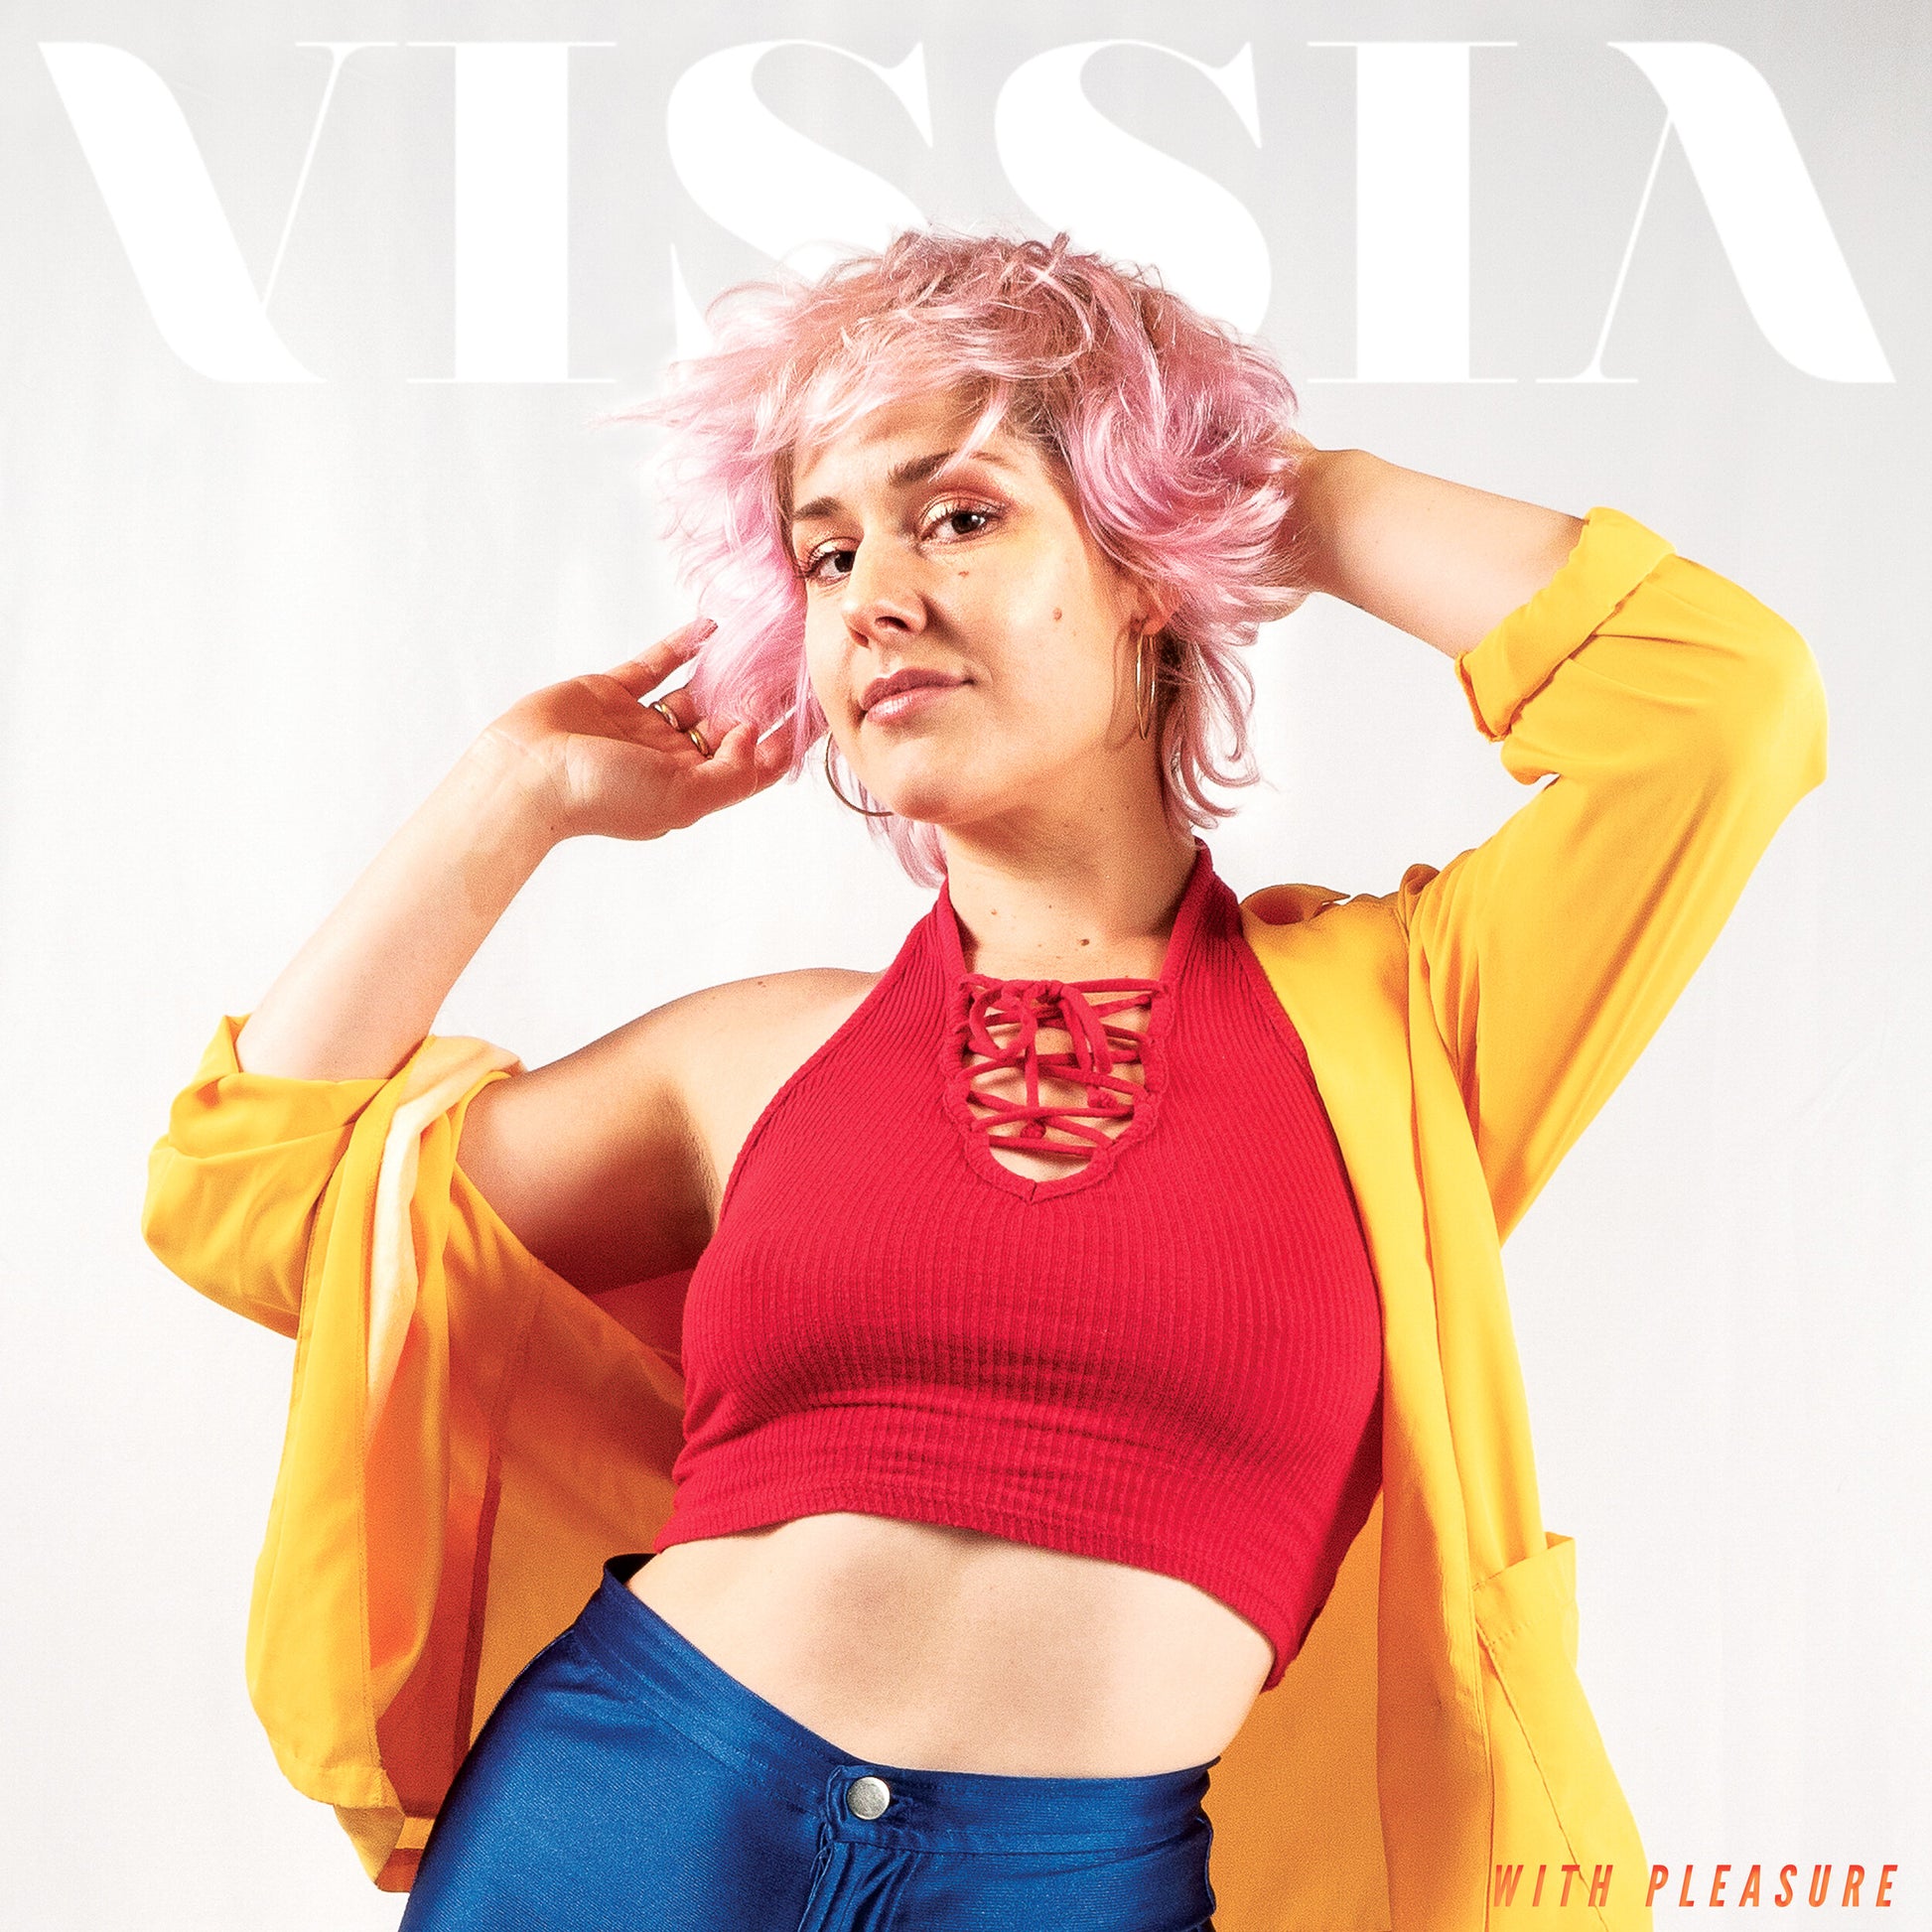 VISSIA With Pleasure album cover; the cover is a medium shot photo of a pink-haired woman on a white background; she is wearing silver hoop earrings, shiny blue disco pants, a fuschia halter top, and bright yellow light blazer